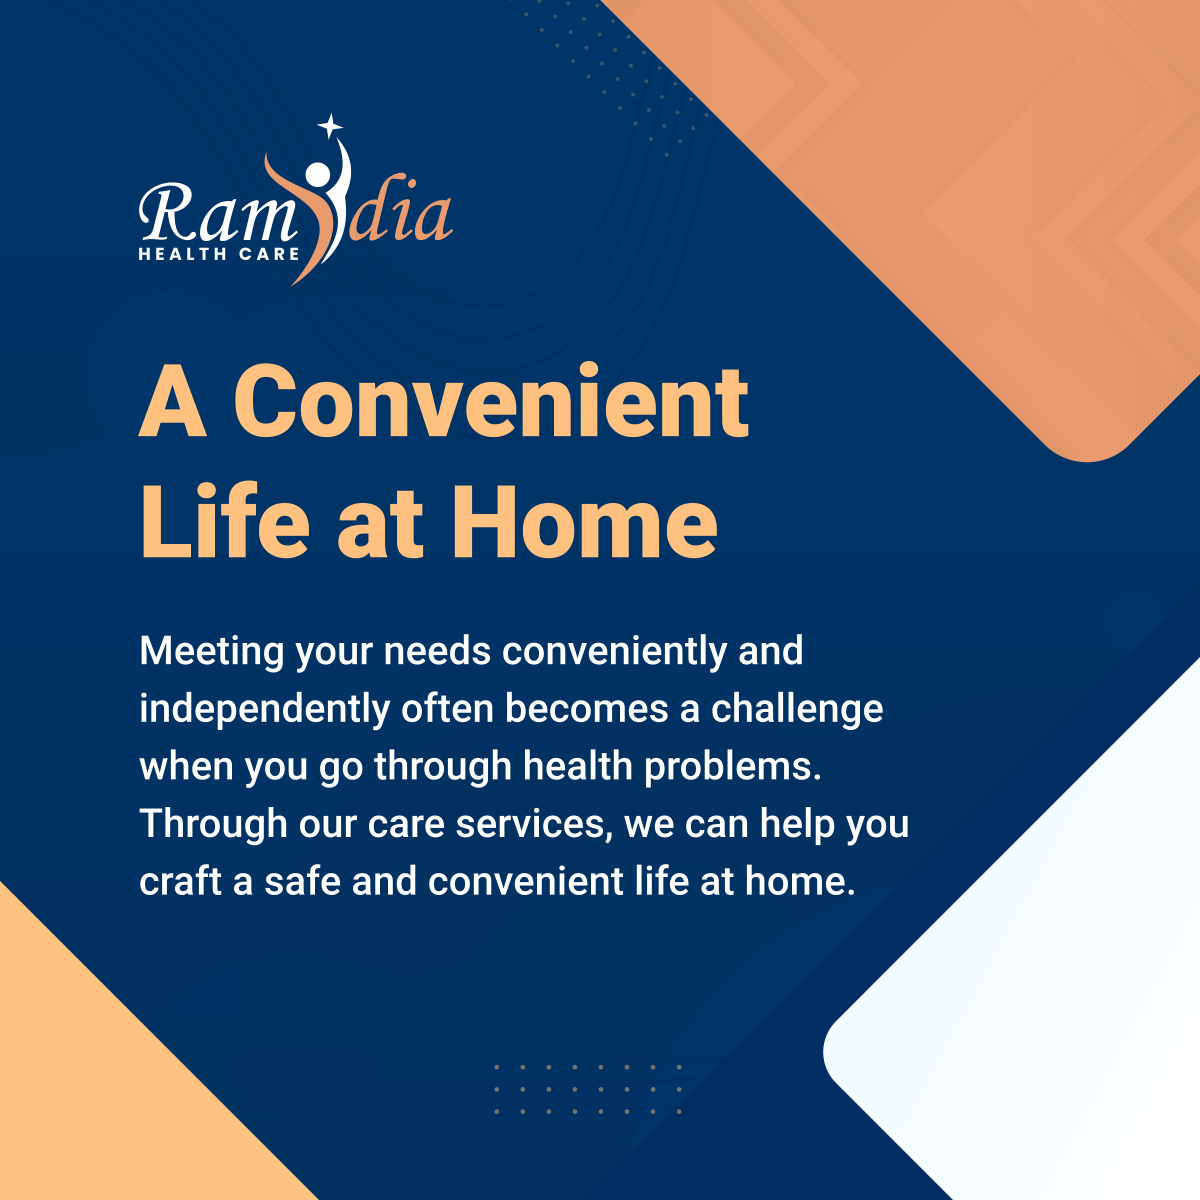 A Convenient Life at Home

#CareServices #HomeHealthCare #ConvenientLife #PerthAmboyNJ